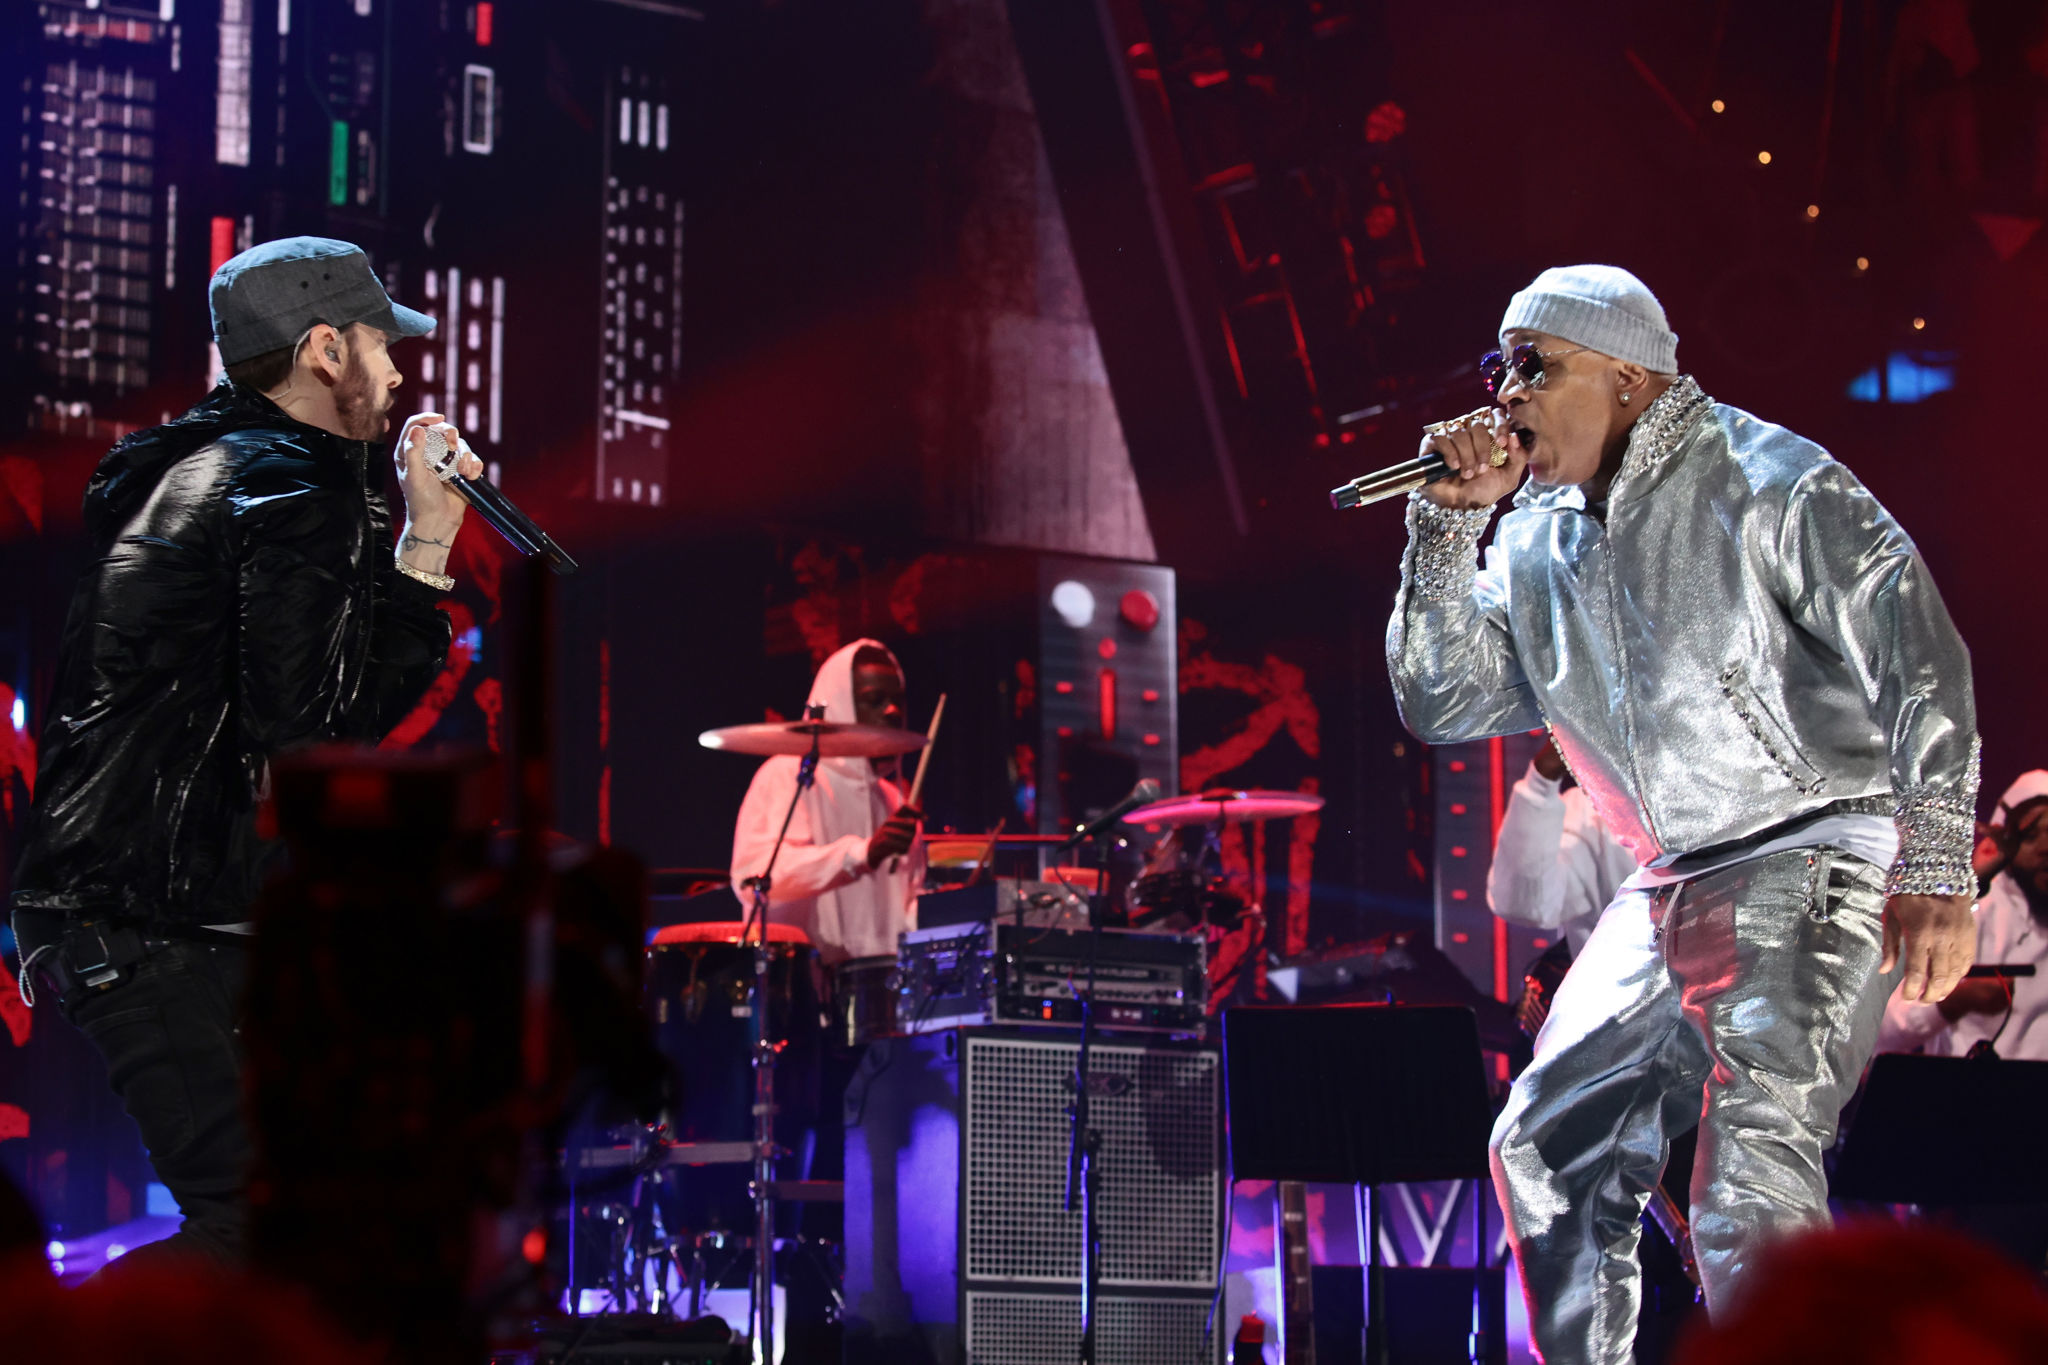 CLEVELAND, OHIO - OCTOBER 30: Eminem and LL Cool J perform onstage during the 36th Annual Rock & Roll Hall Of Fame Induction Ceremony at Rocket Mortgage Fieldhouse on October 30, 2021 in Cleveland, Ohio. (Photo by Dimitrios Kambouris/Getty Images for The Rock and Roll Hall of Fame )